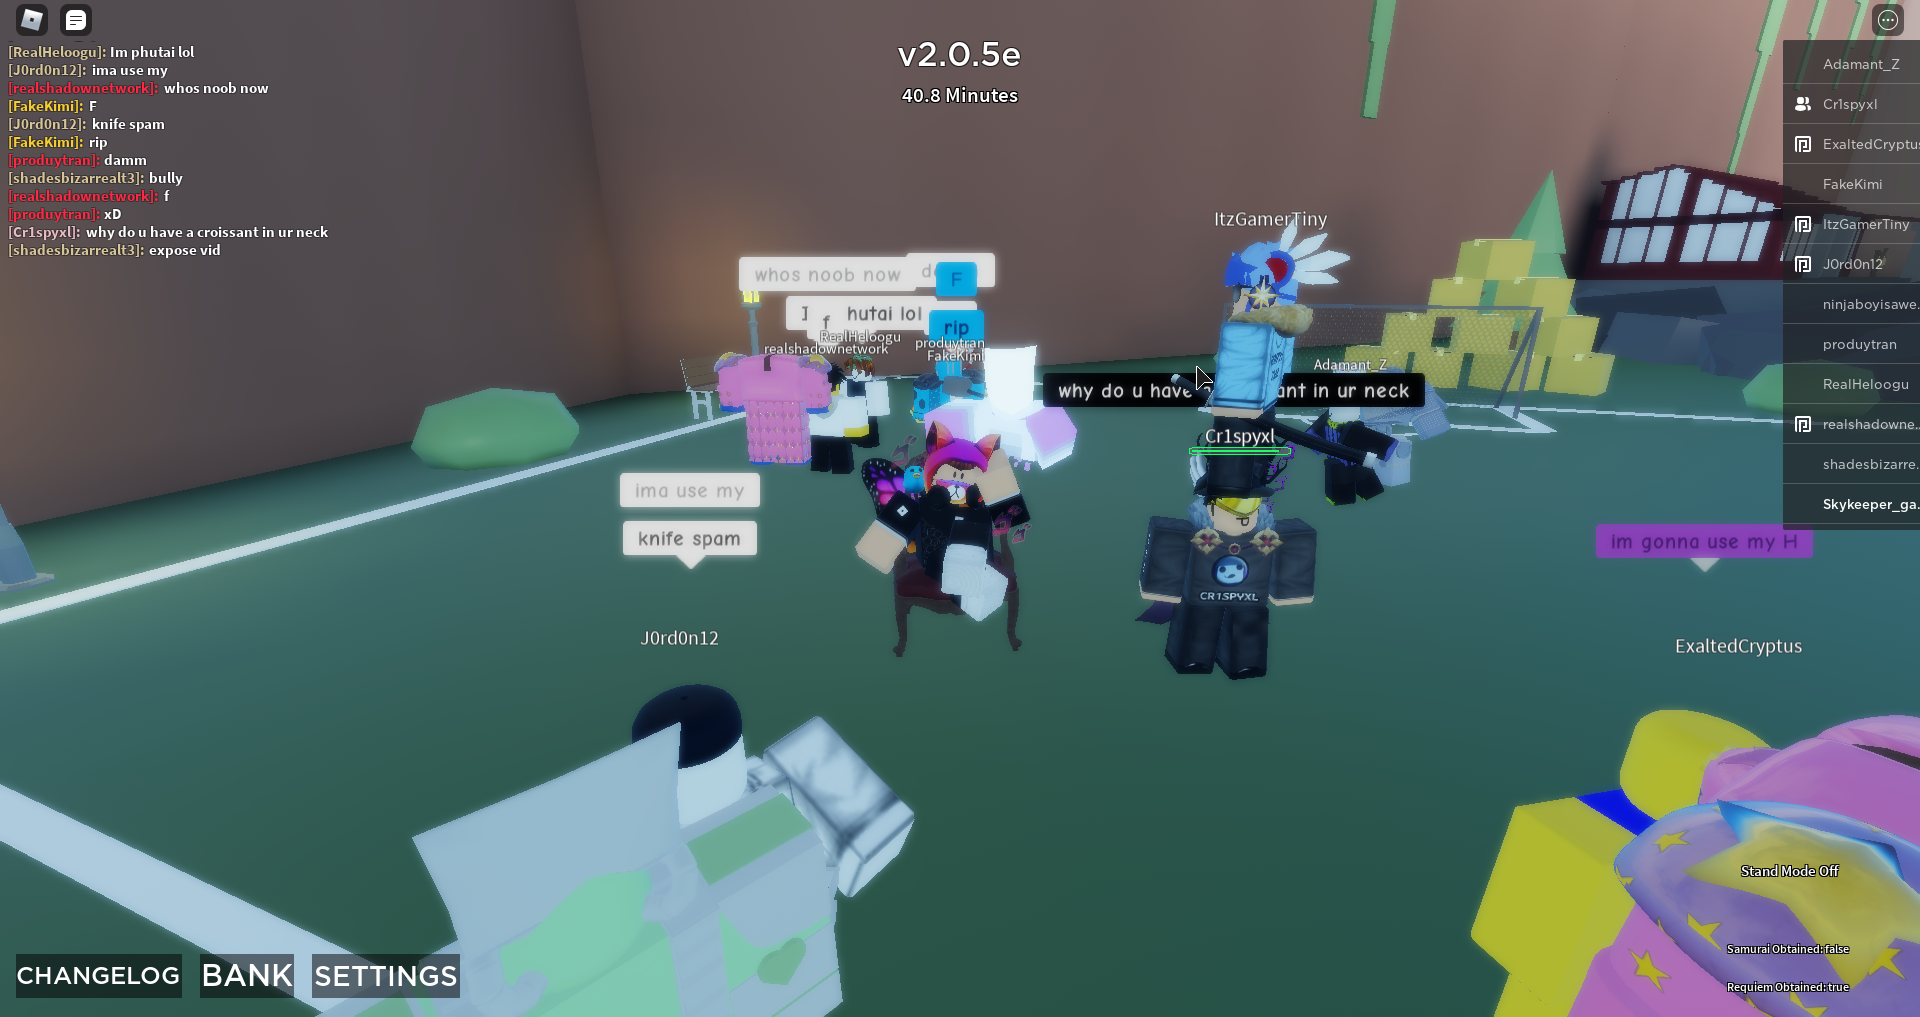 Tell Me Anyone You Know In This Picture Fandom - shadow network roblox username